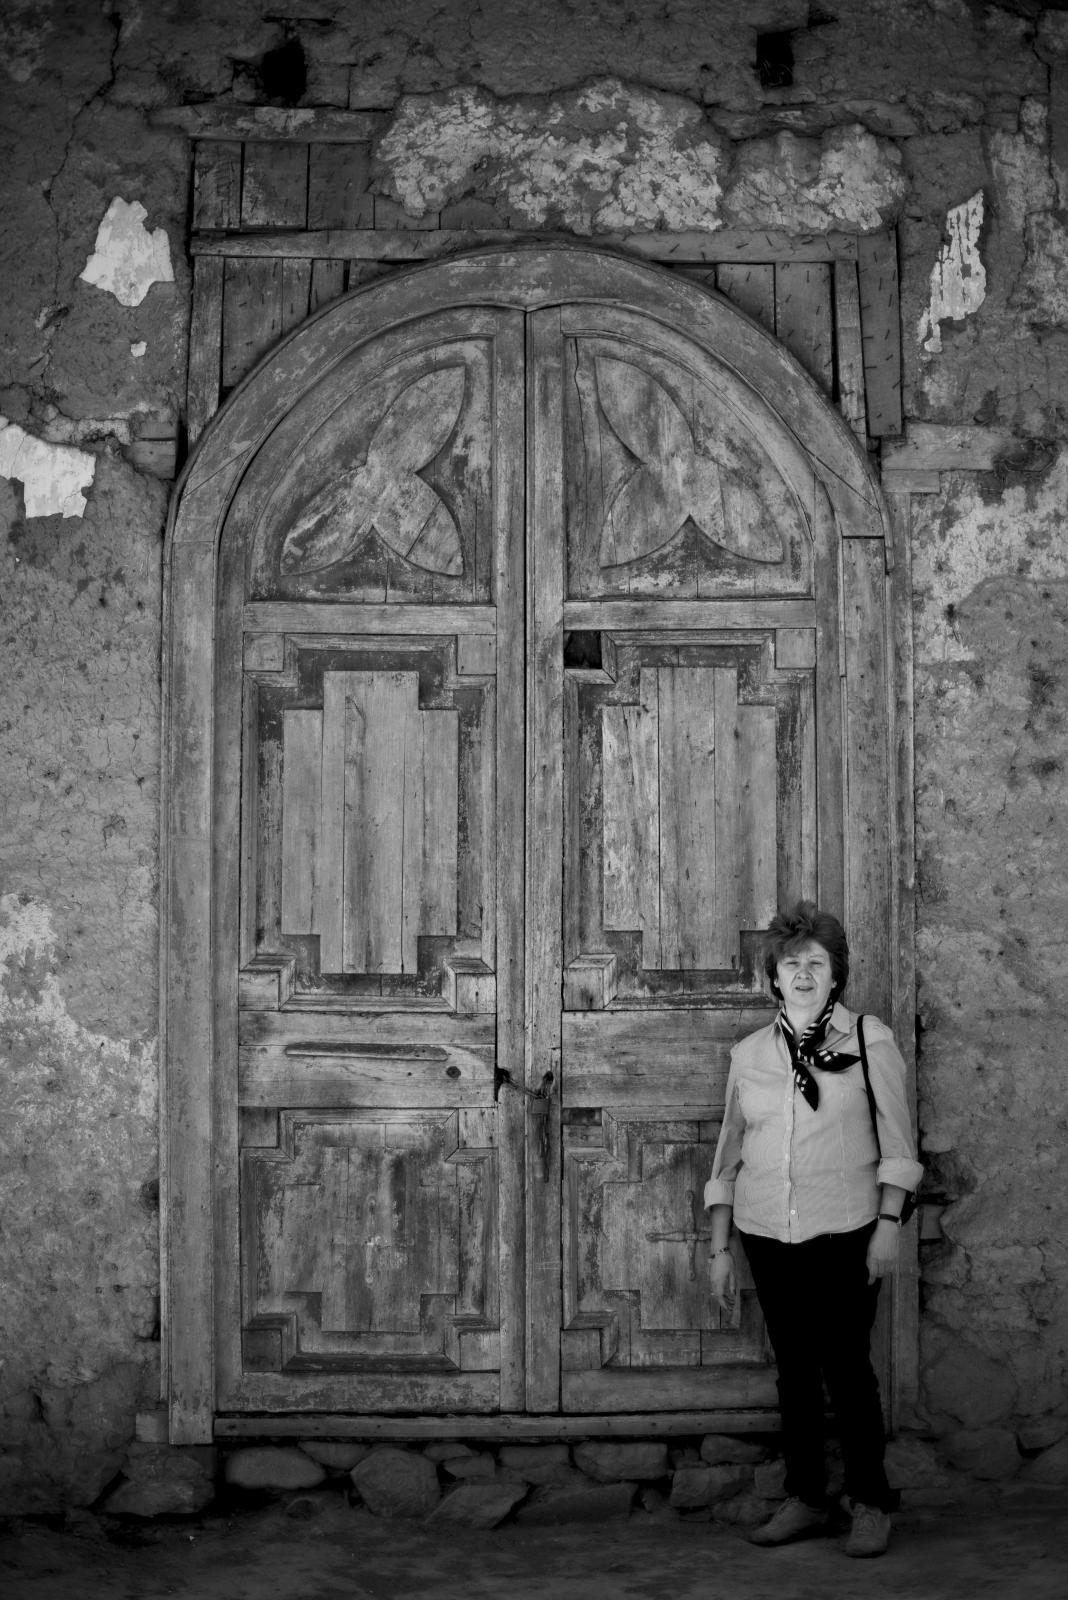 The silent and lonely death in the avocado valley - A woman poses in the ruins of an old church that has been...